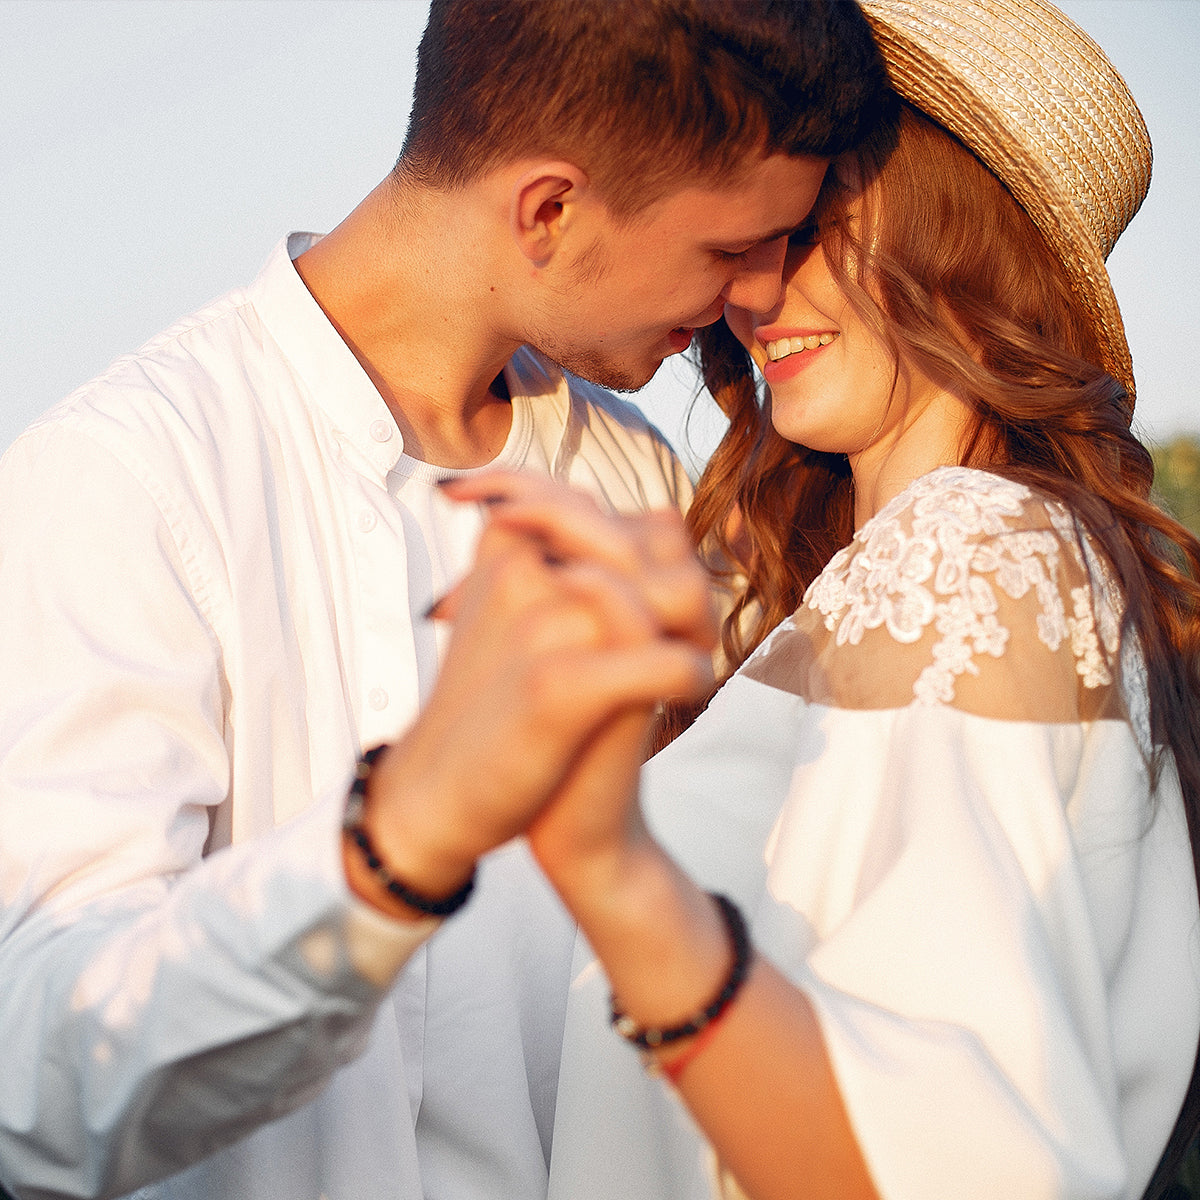 A young couple in white clothing sharing a warm embrace, radiating love and affection towards each other.